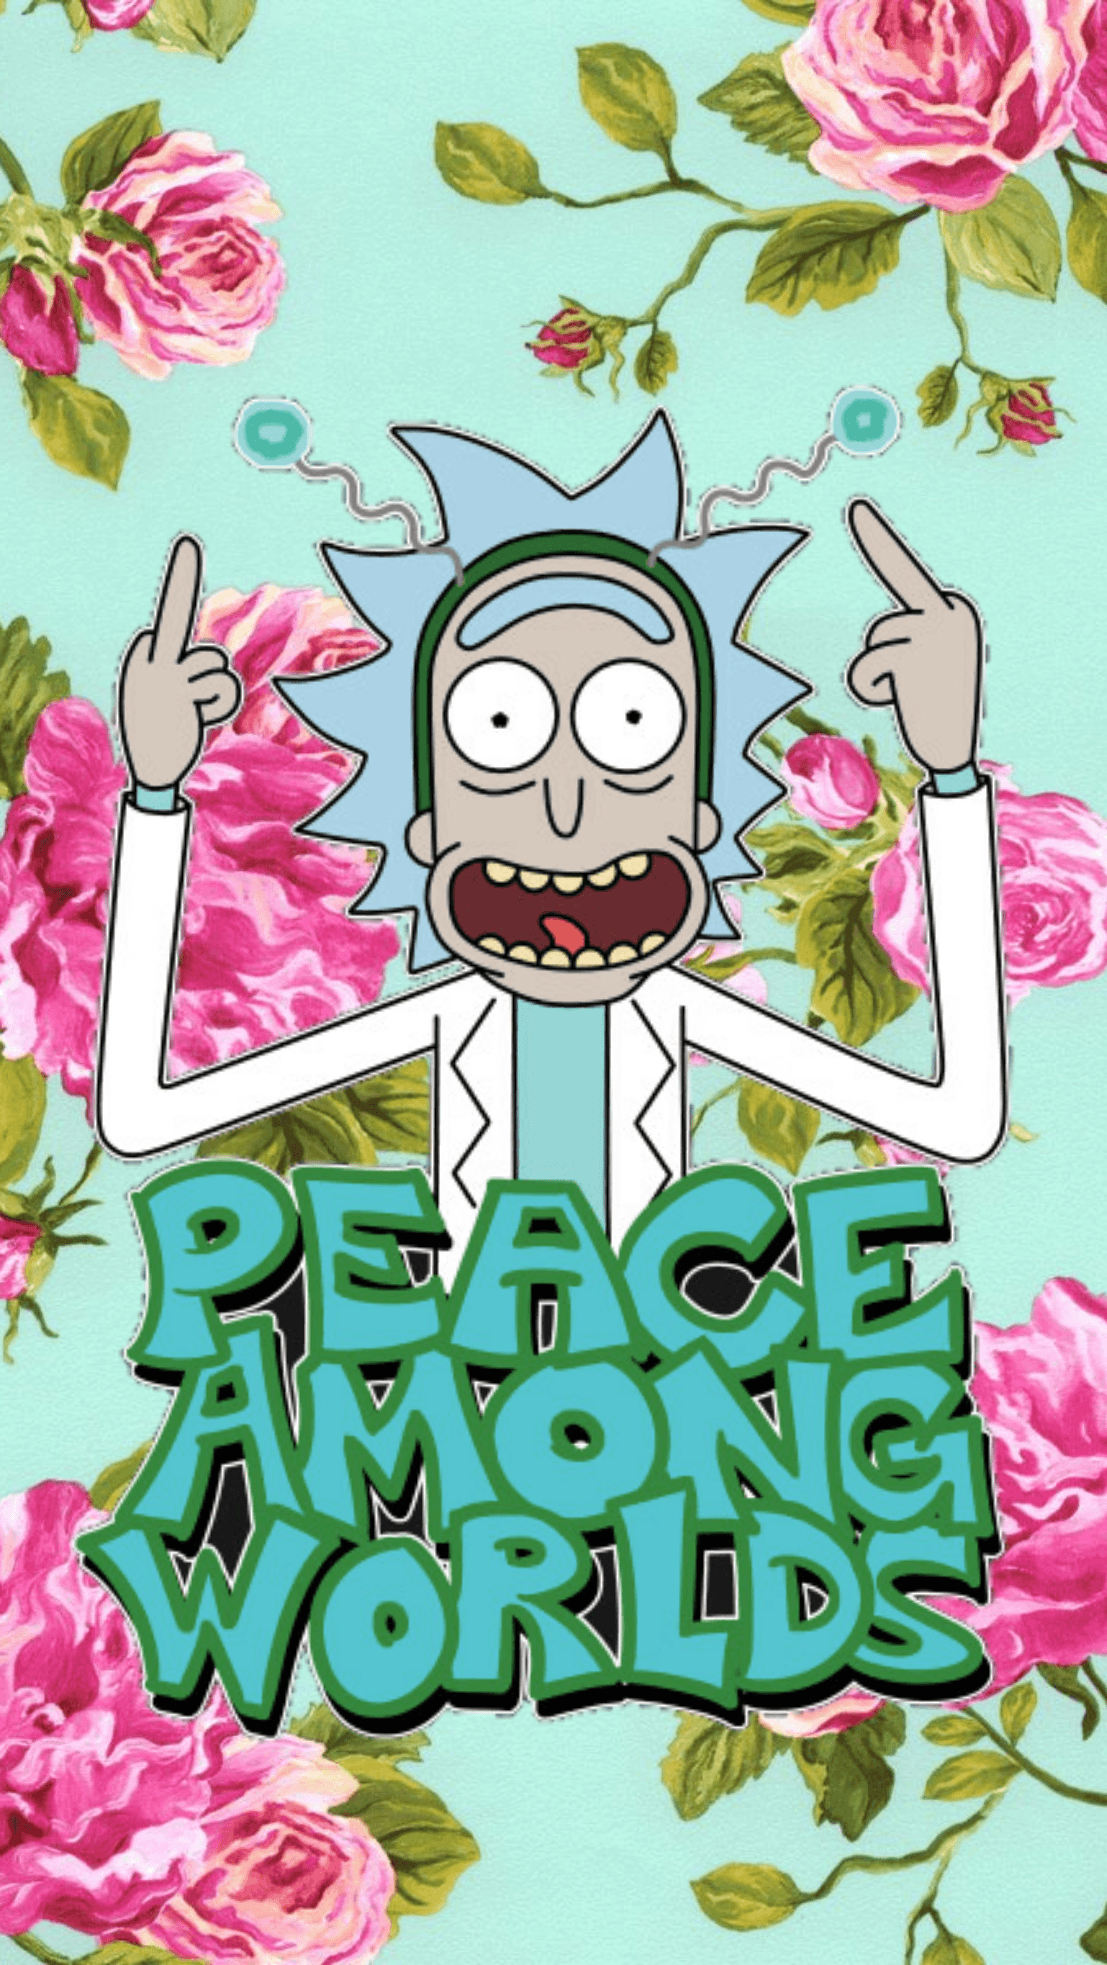 Peace among worlds rick and morty wallpaper